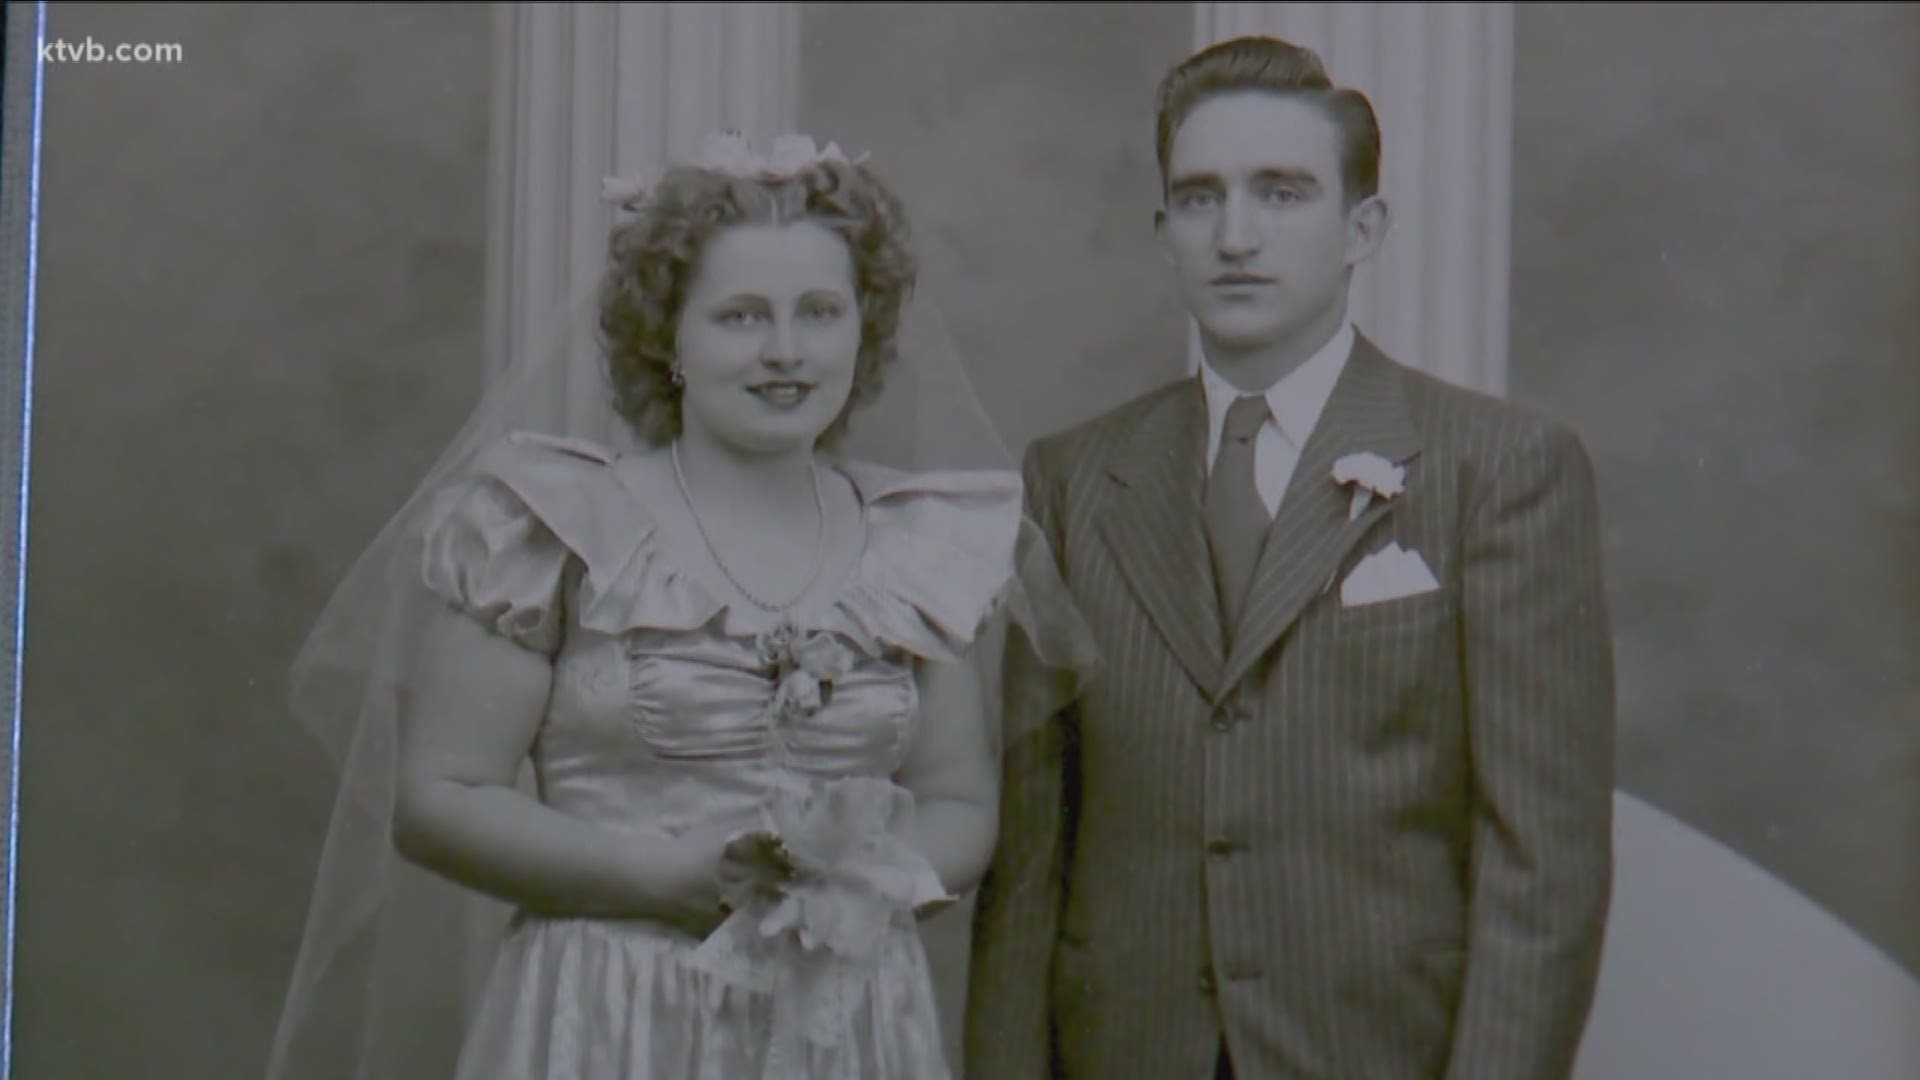 Valentine's Day cynics call it a "Hallmark holiday," but it's origins are rooted in romance. Much like Mary and Lester Peck from Nampa and their young love that has lasted for nearly three quarters of a century.